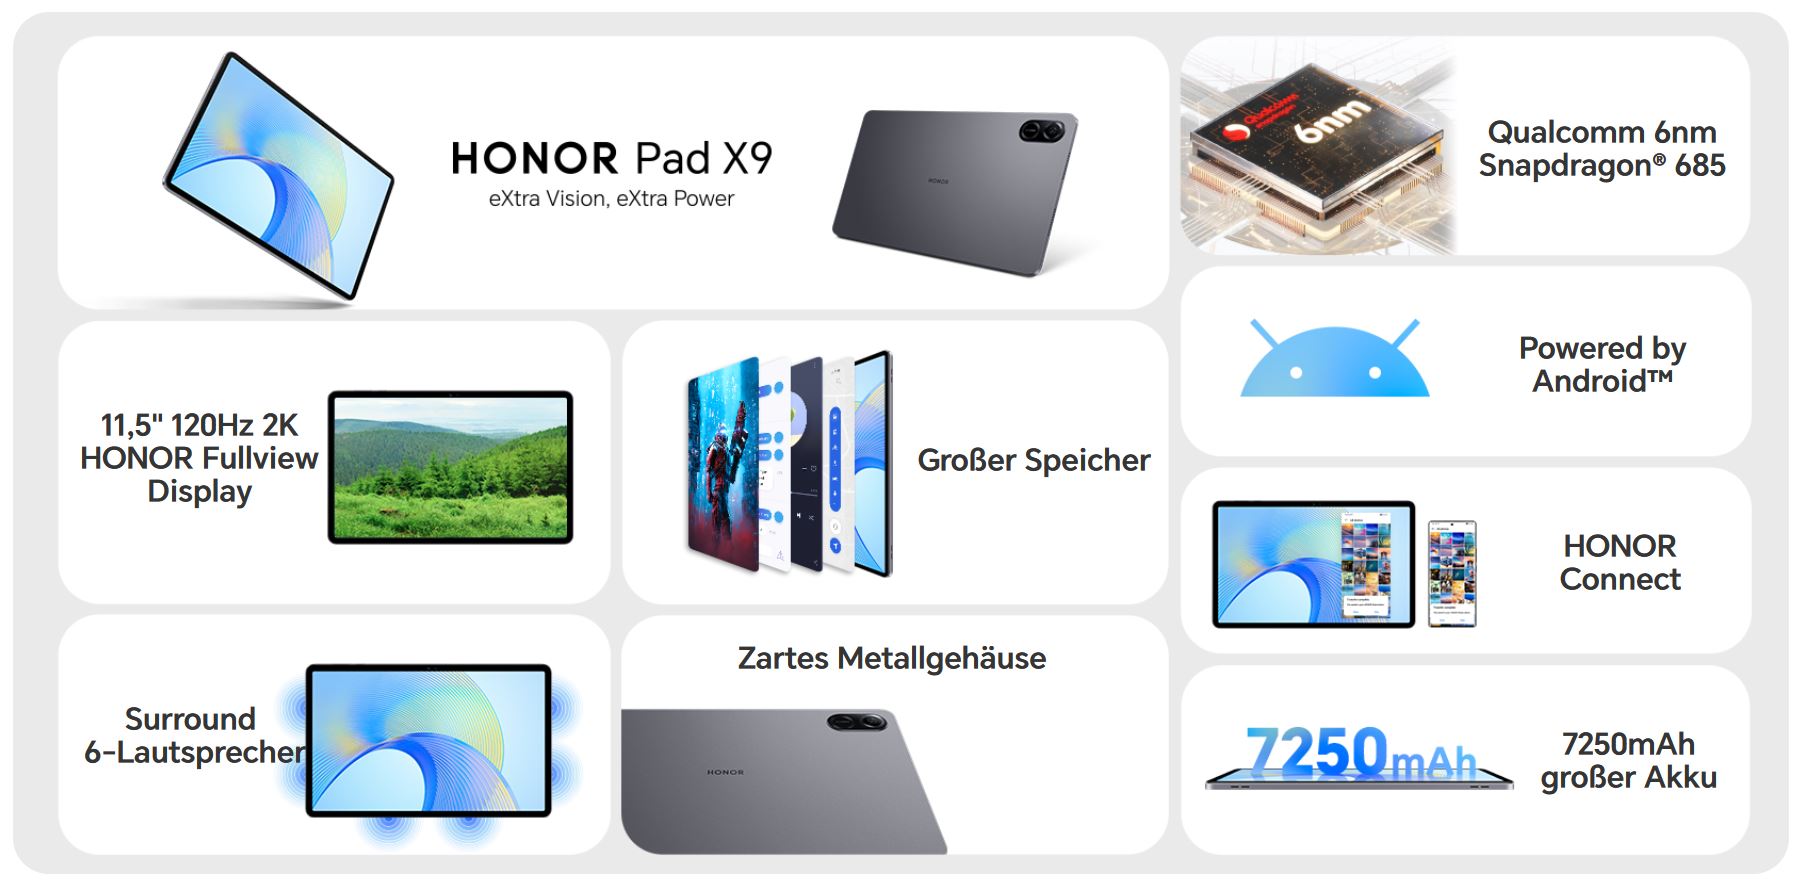 Honor Pad 8: Can a £229 tablet rival the iPad?, Tech News